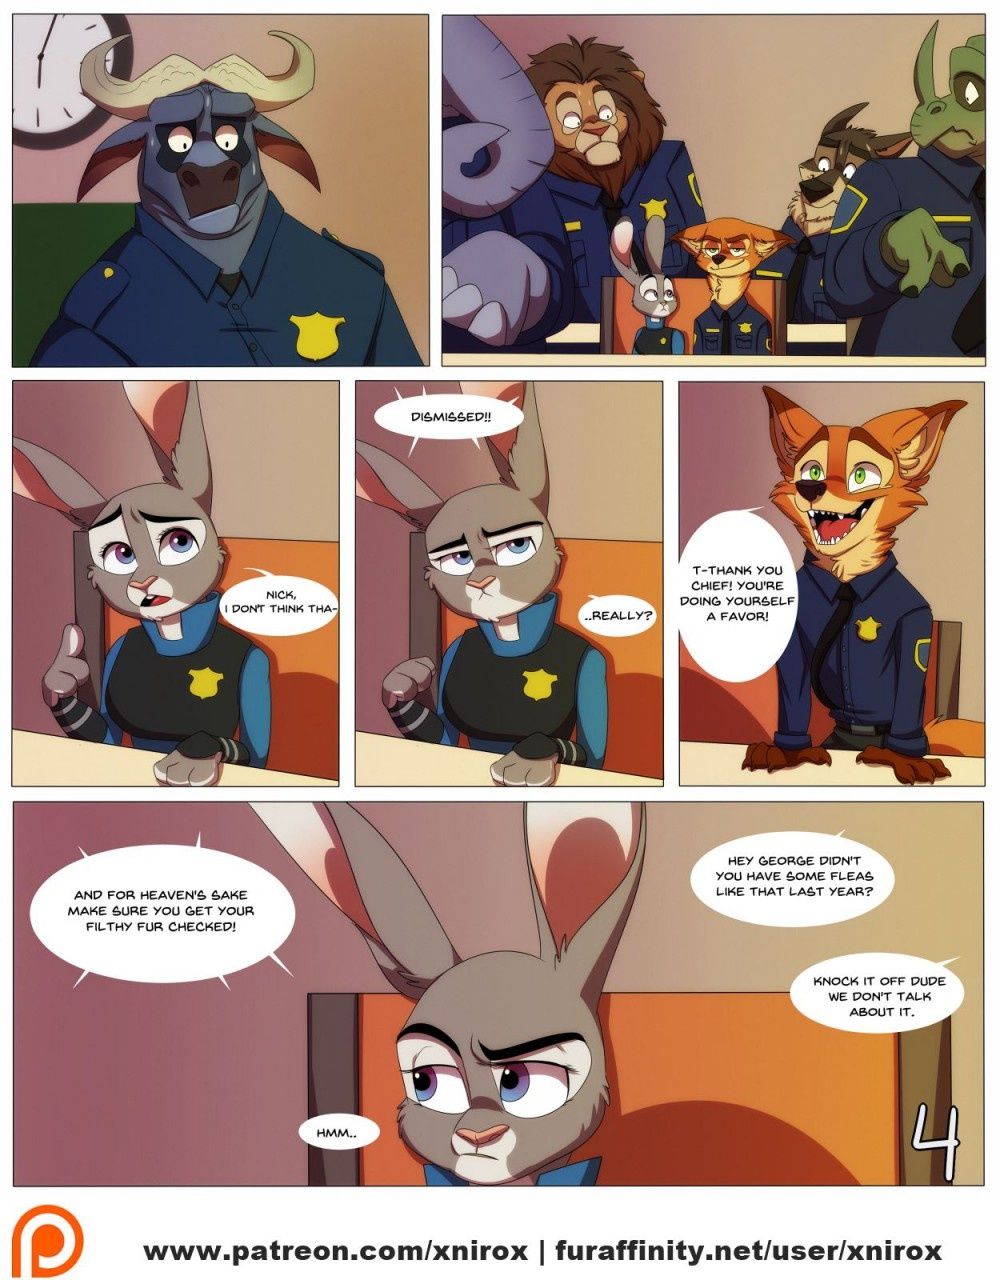 [Xnirox] Zootopia - Twitterpated, Furry Cartoon page 4